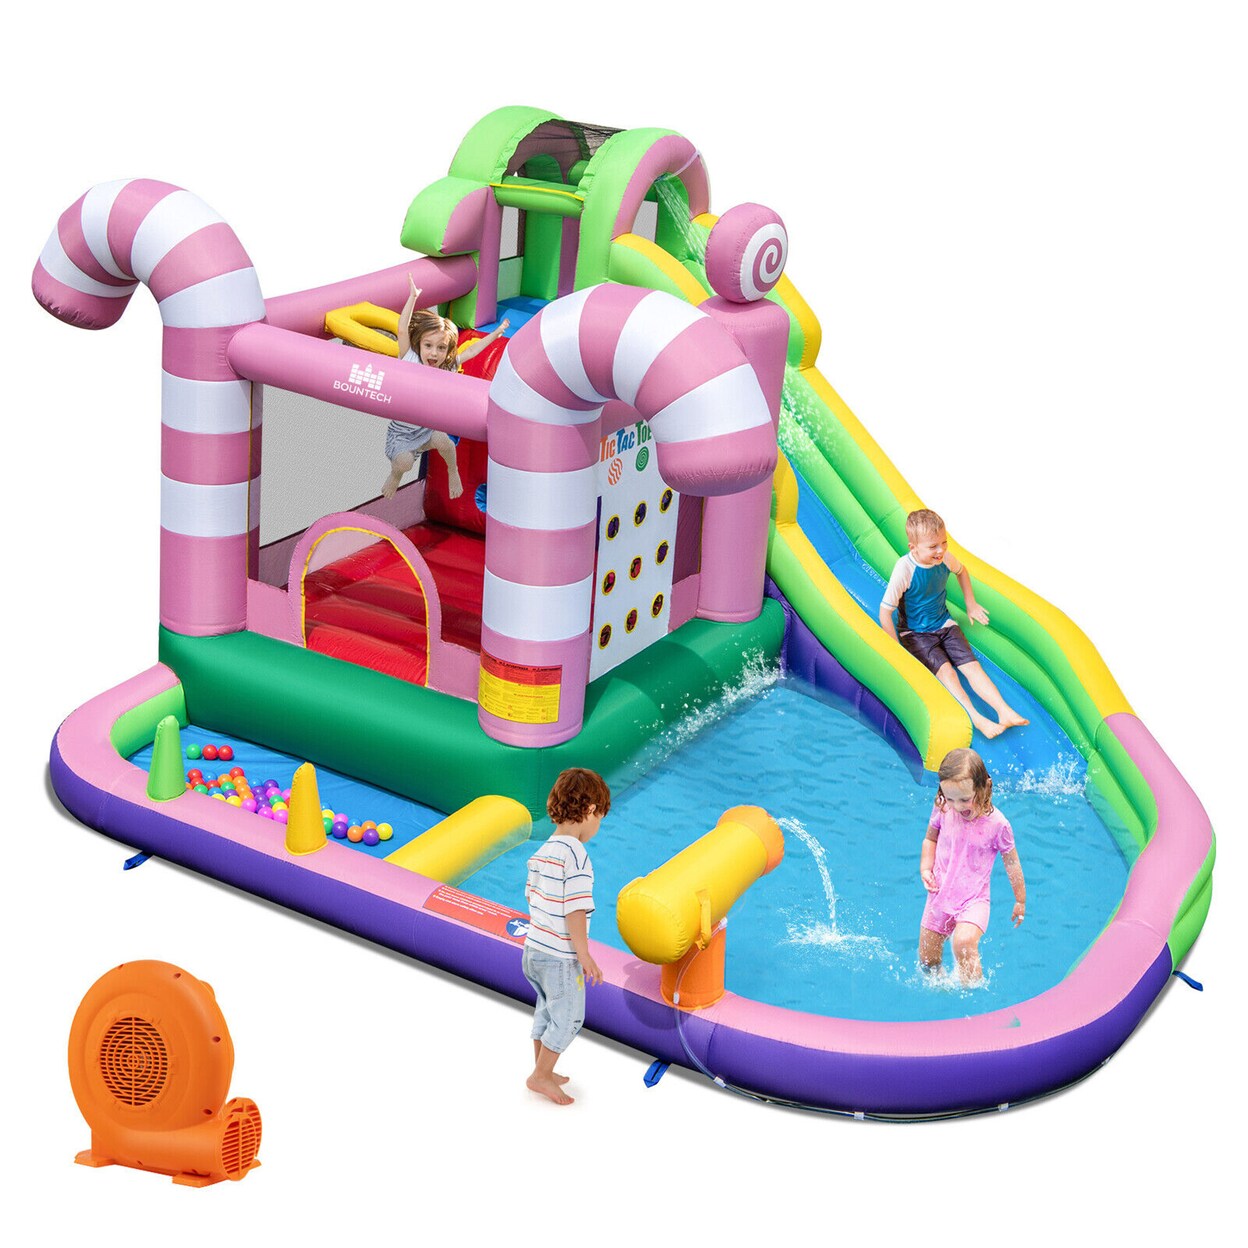 Gymax 9-in-1 Inflatable Bounce House Sweet Candy Water Slide Park Pool w/ 750W Blower